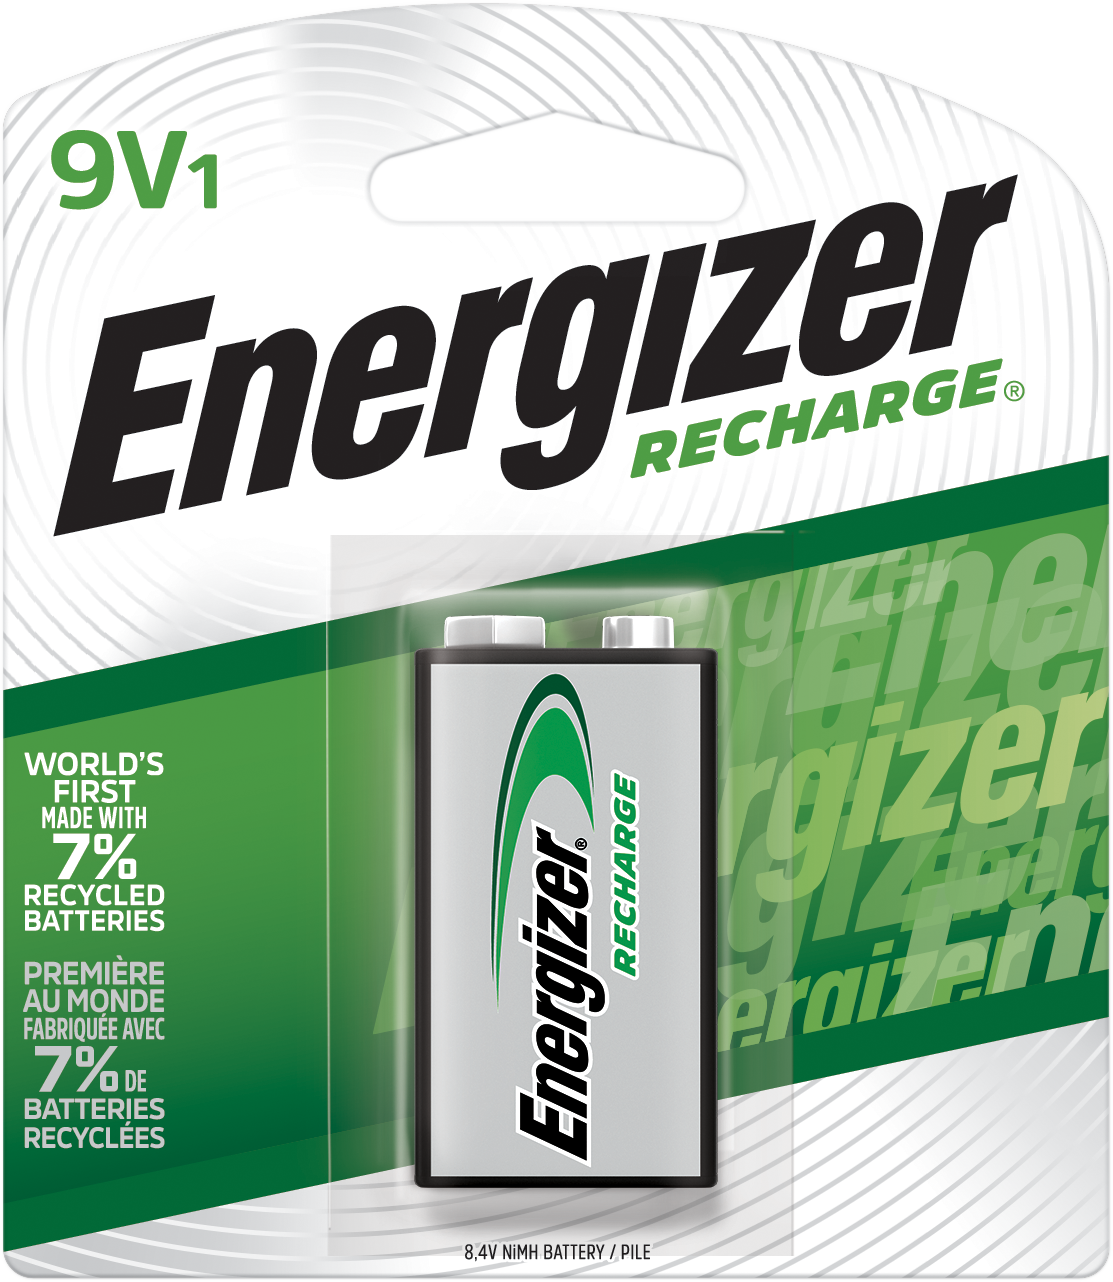 Energizer NH15PPBP2 Power Plus AA 2000mAh Two Rechargeable Batteries